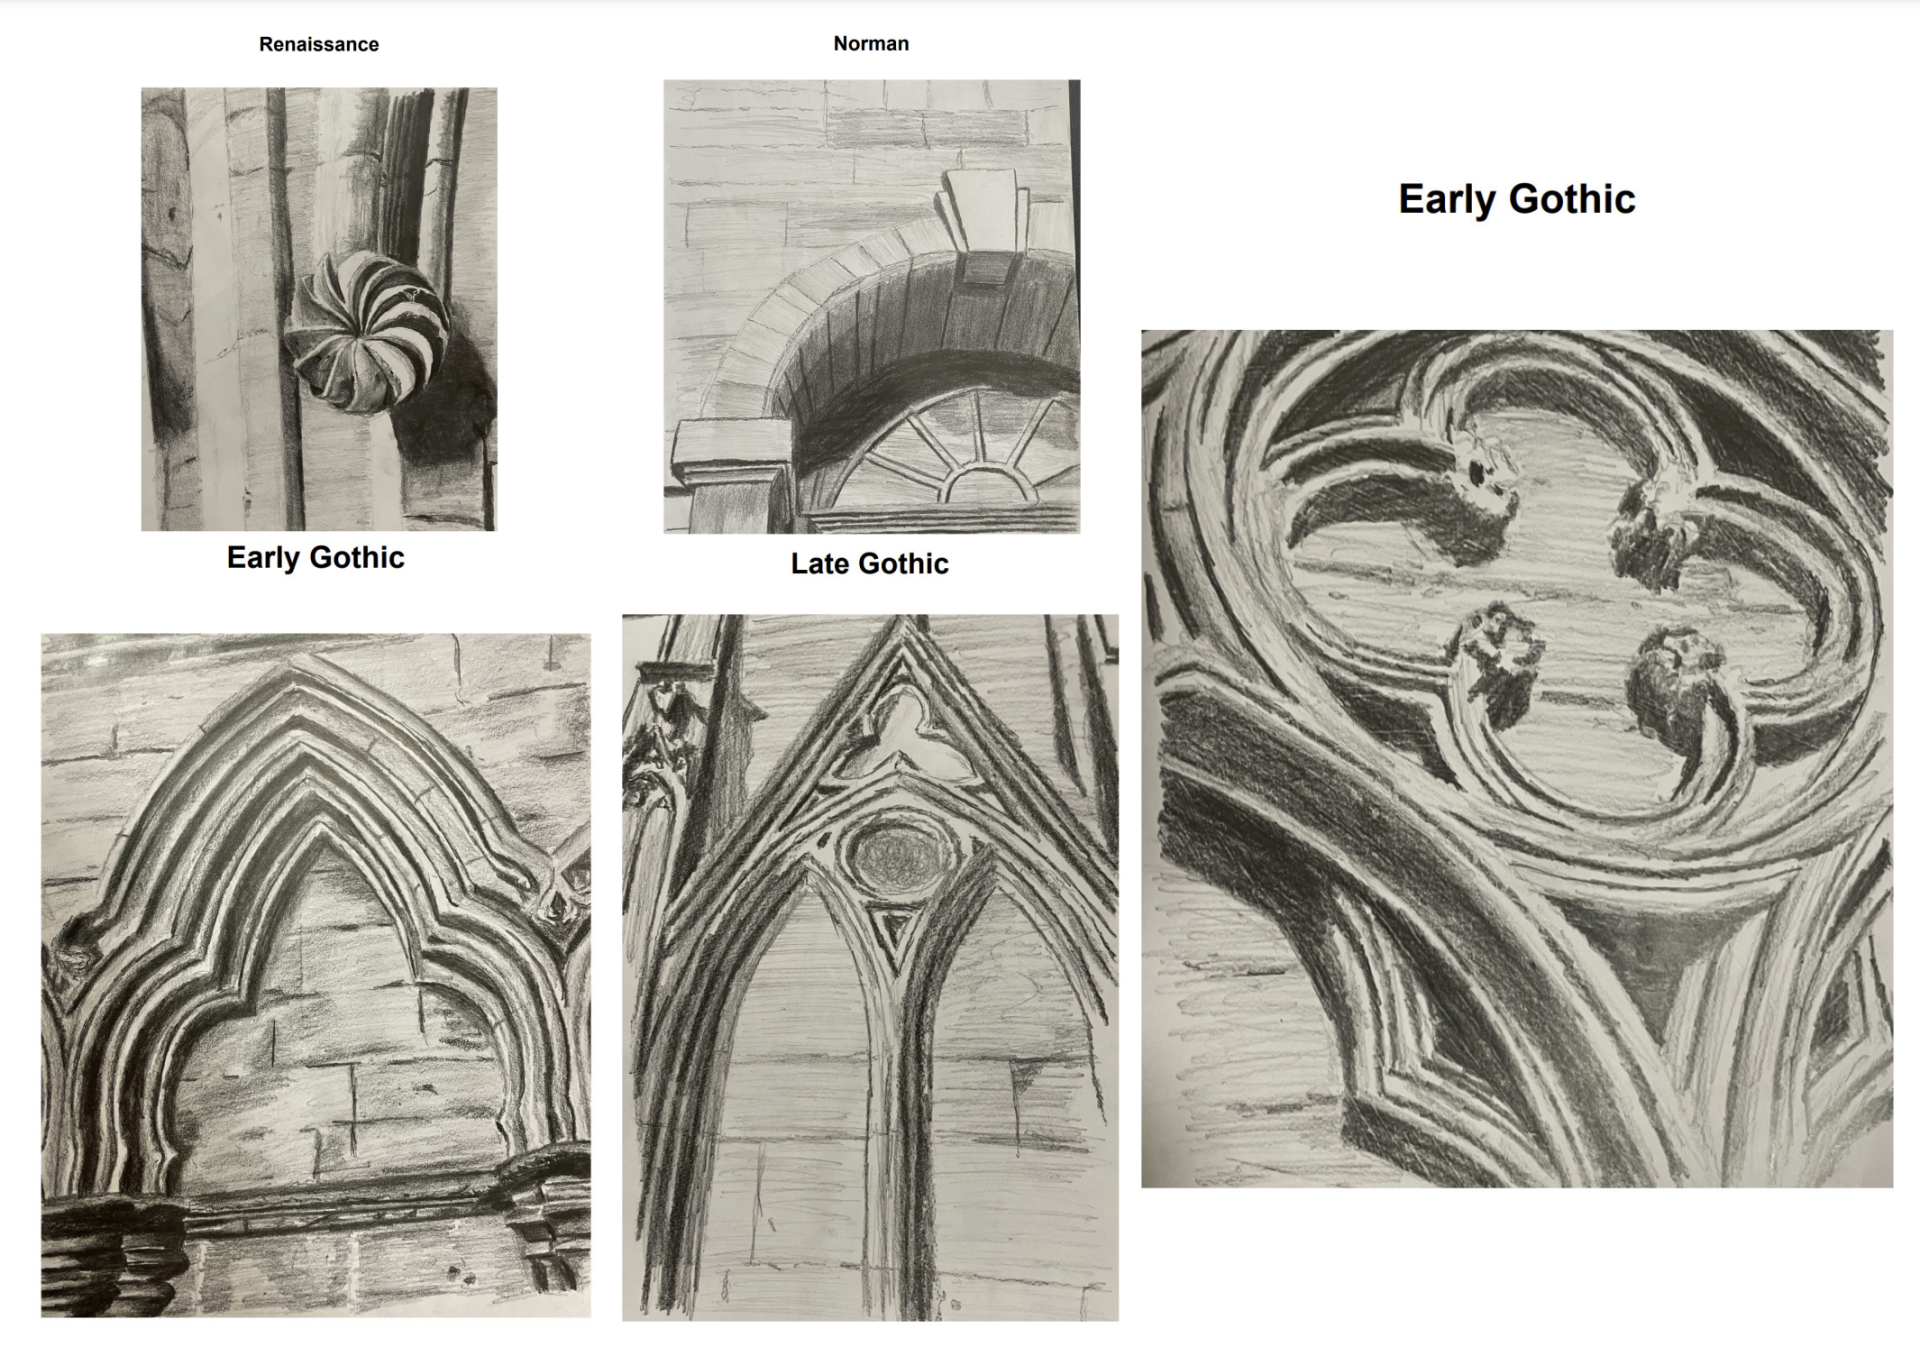 Cathedral Drawings